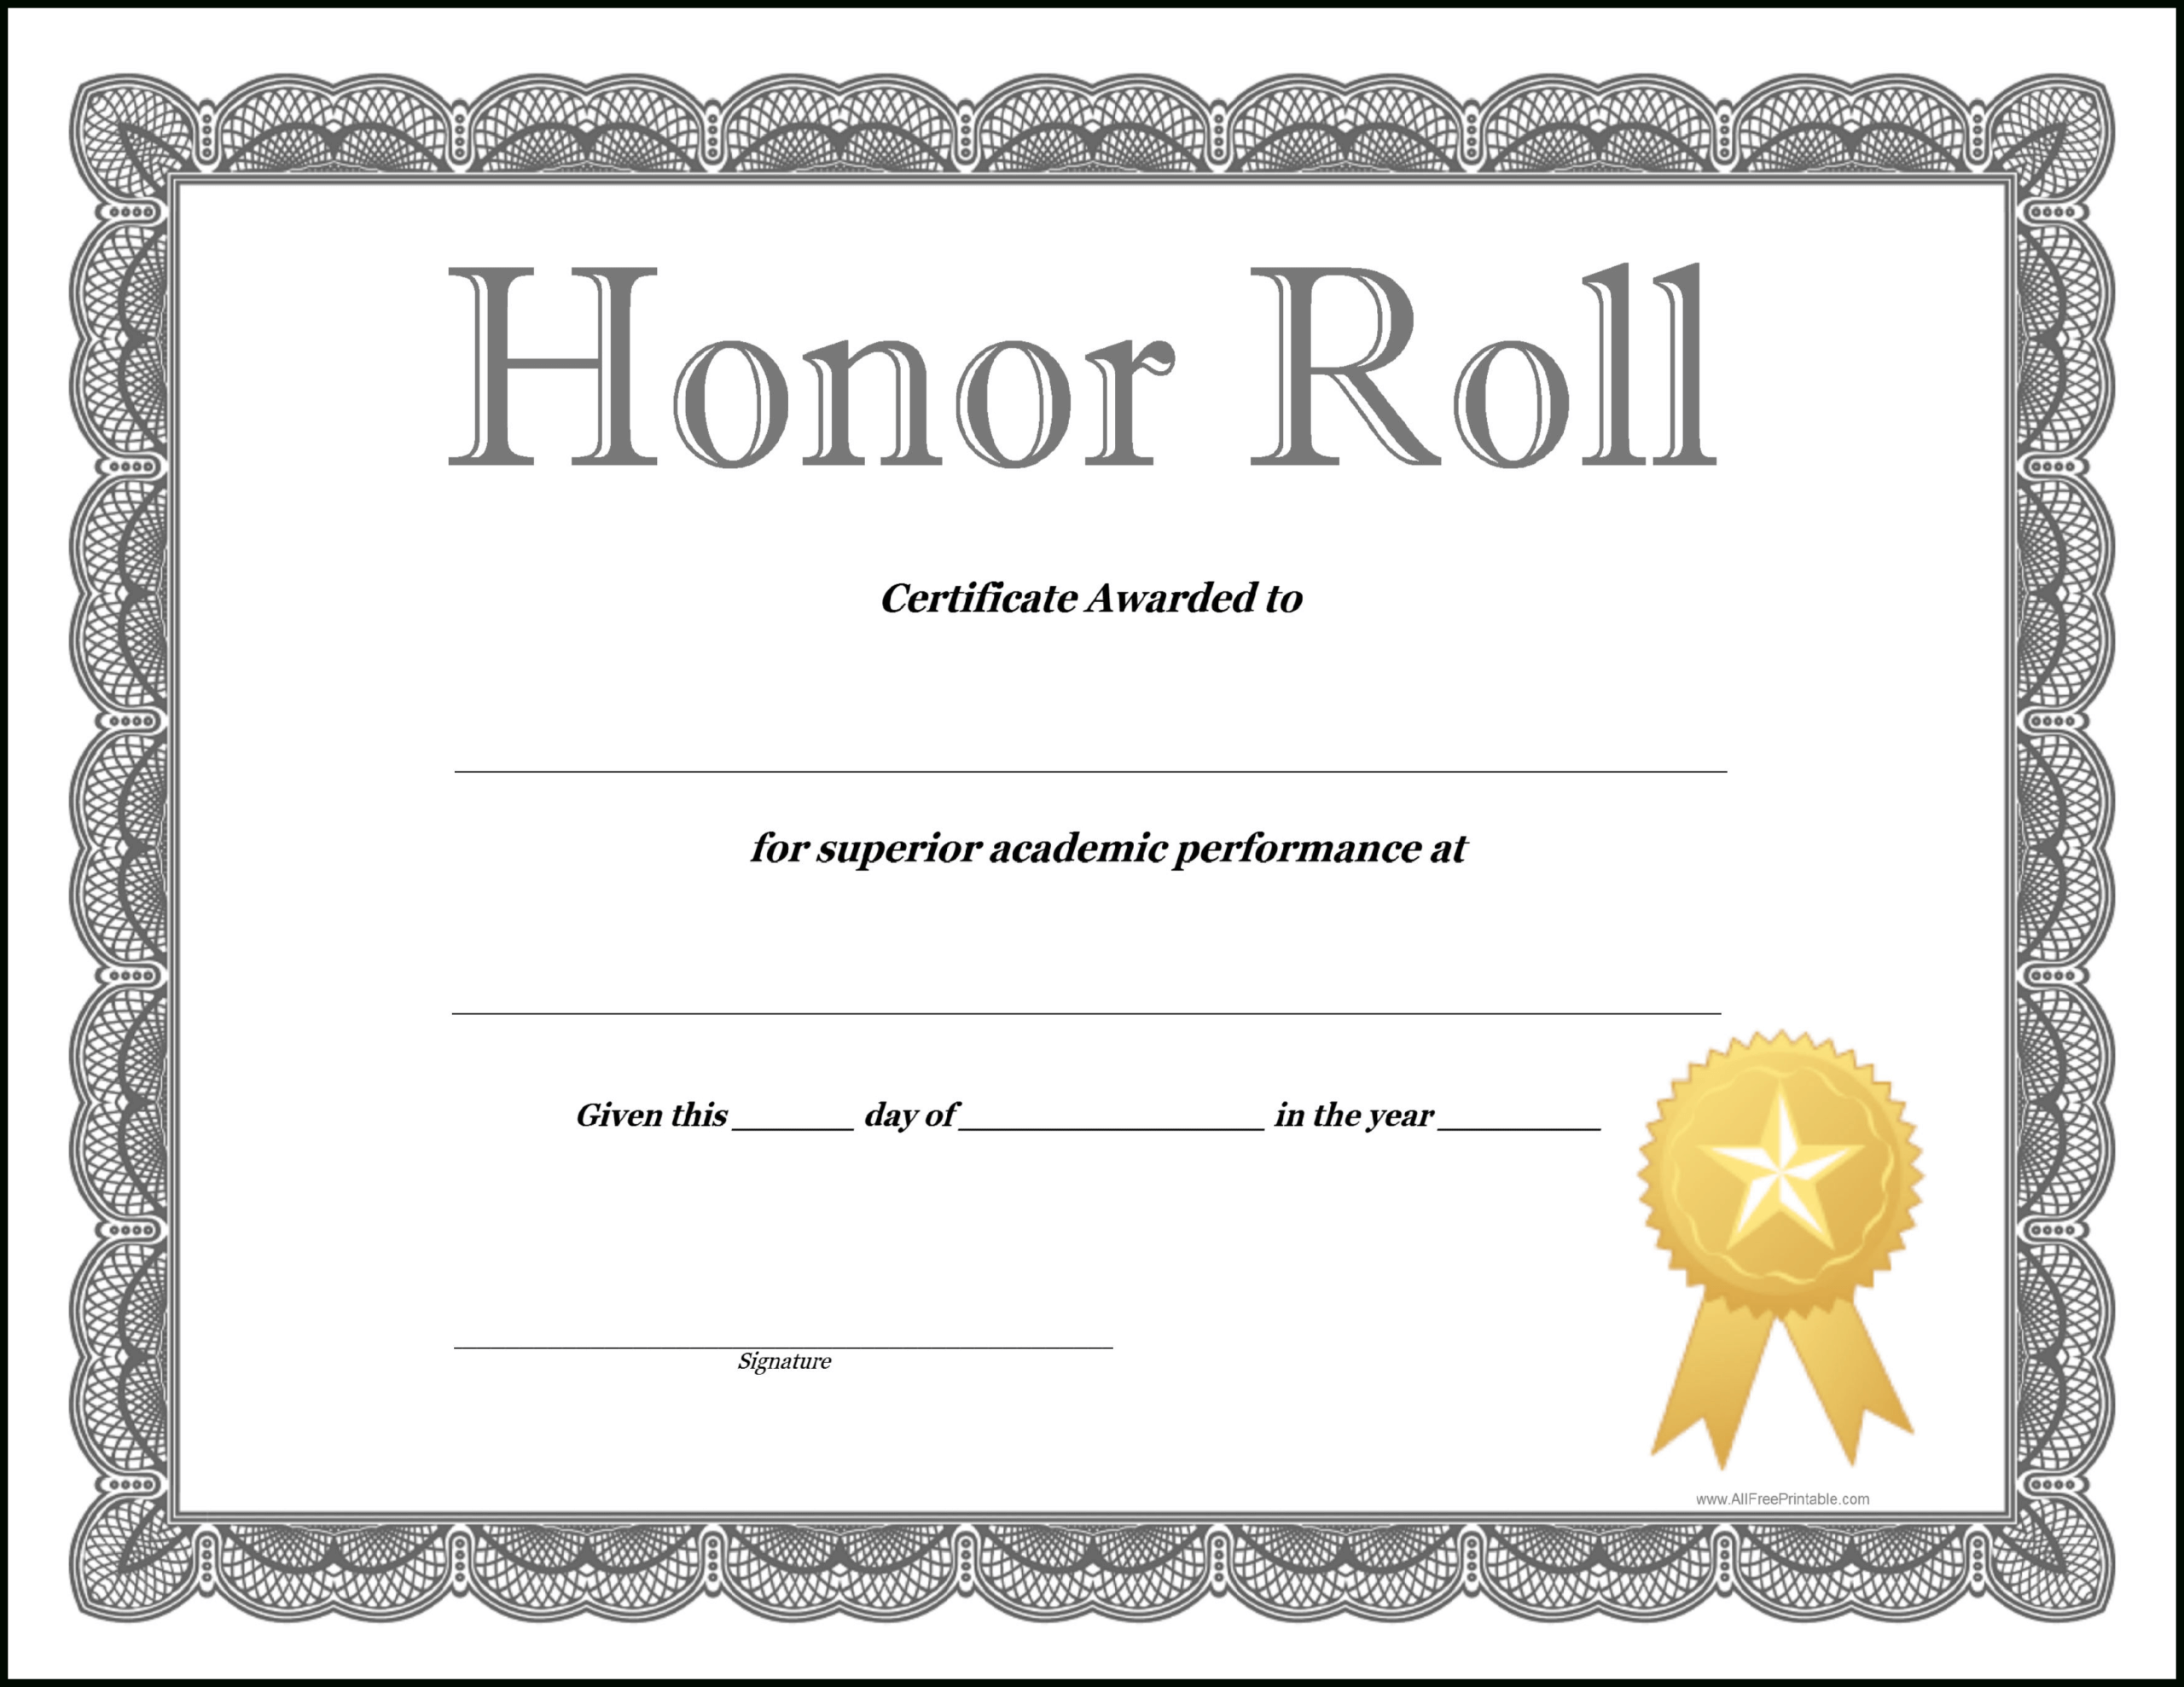 How To Craft A Professional Looking Honor Roll Certificate Intended For Certificate Templates For School